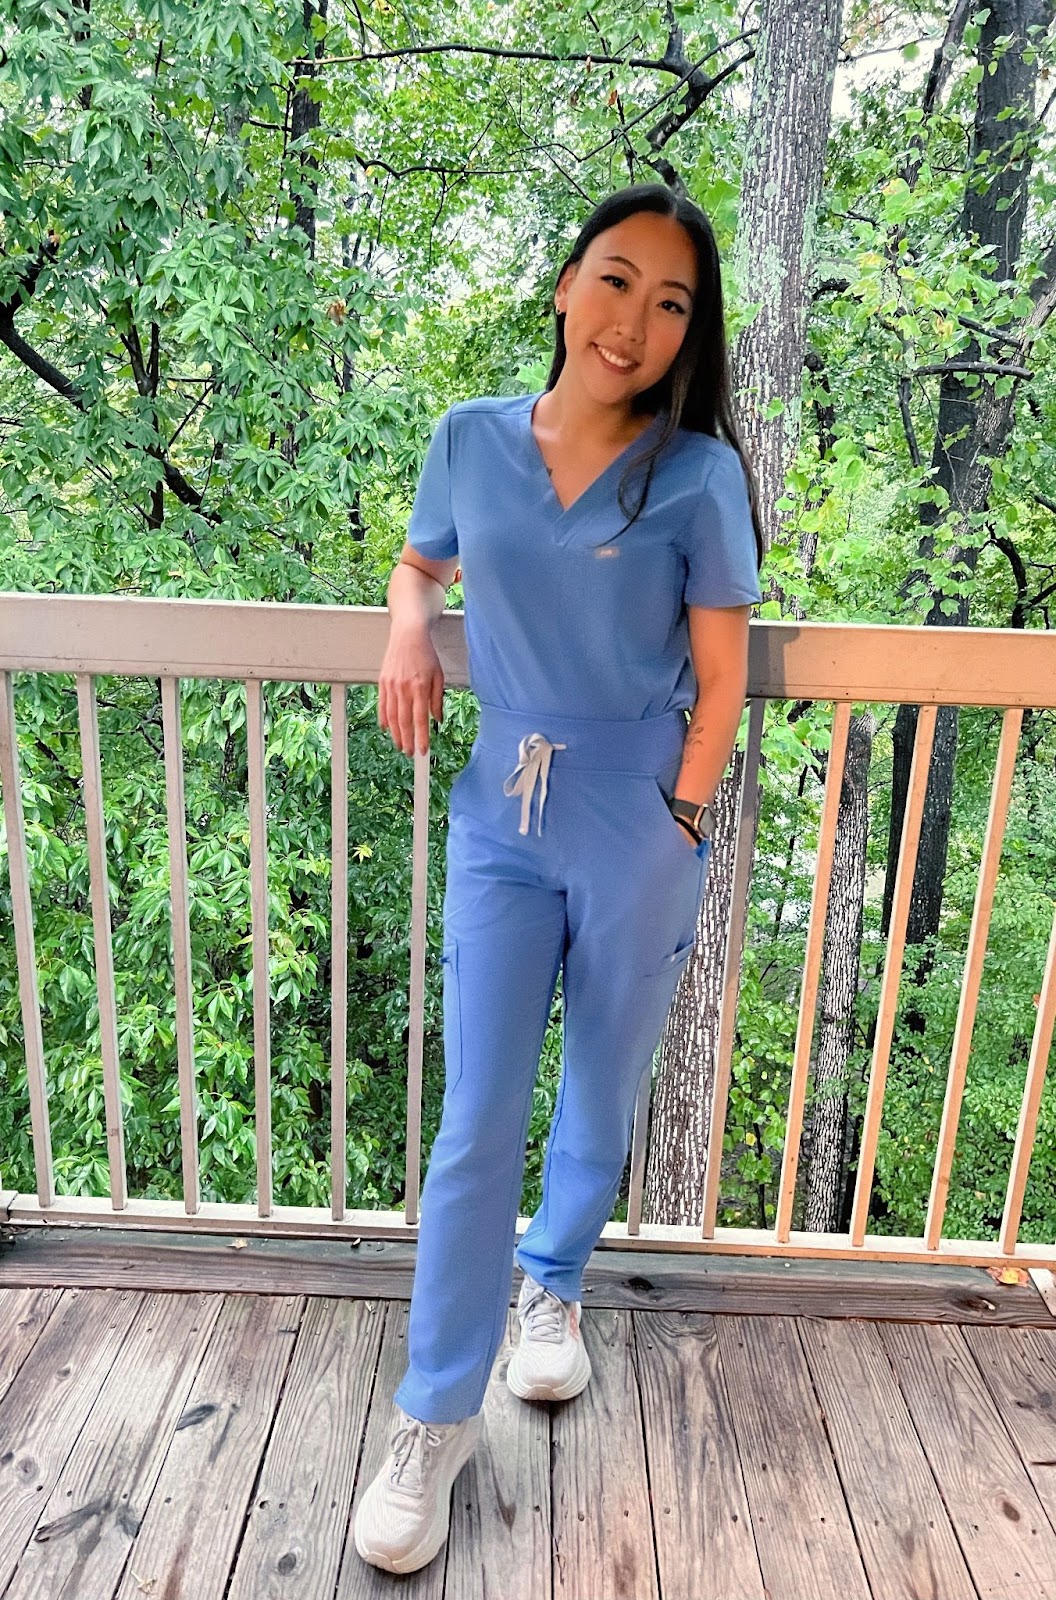 FIGS Scrubs Review + Update on Quality One-Year Later & Fall Colors